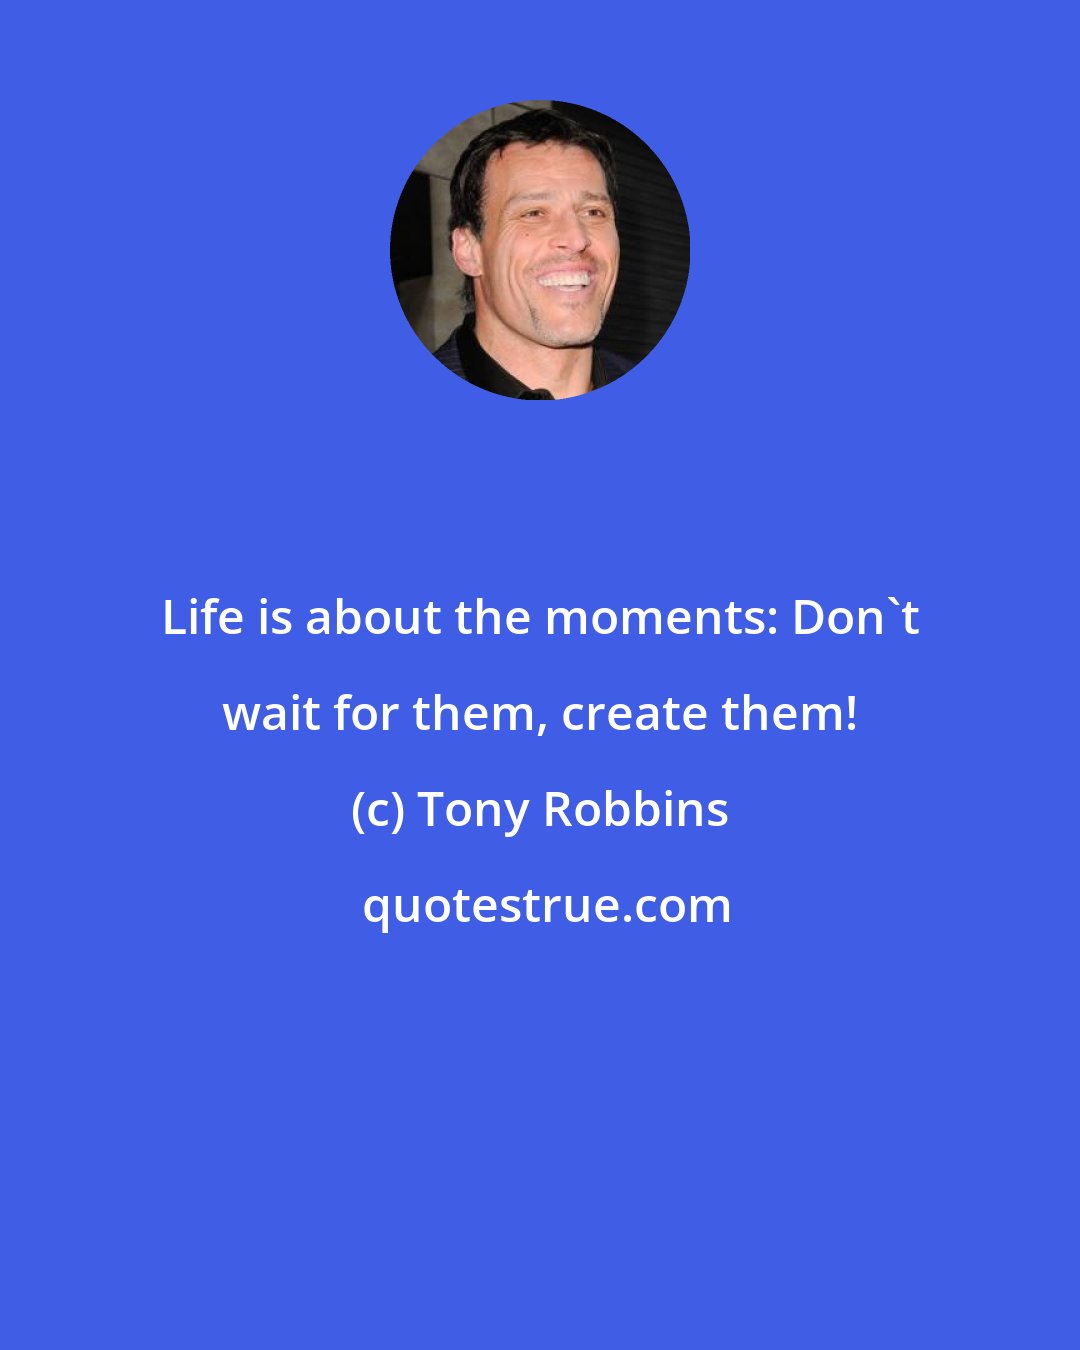 Tony Robbins: Life is about the moments: Don't wait for them, create them!